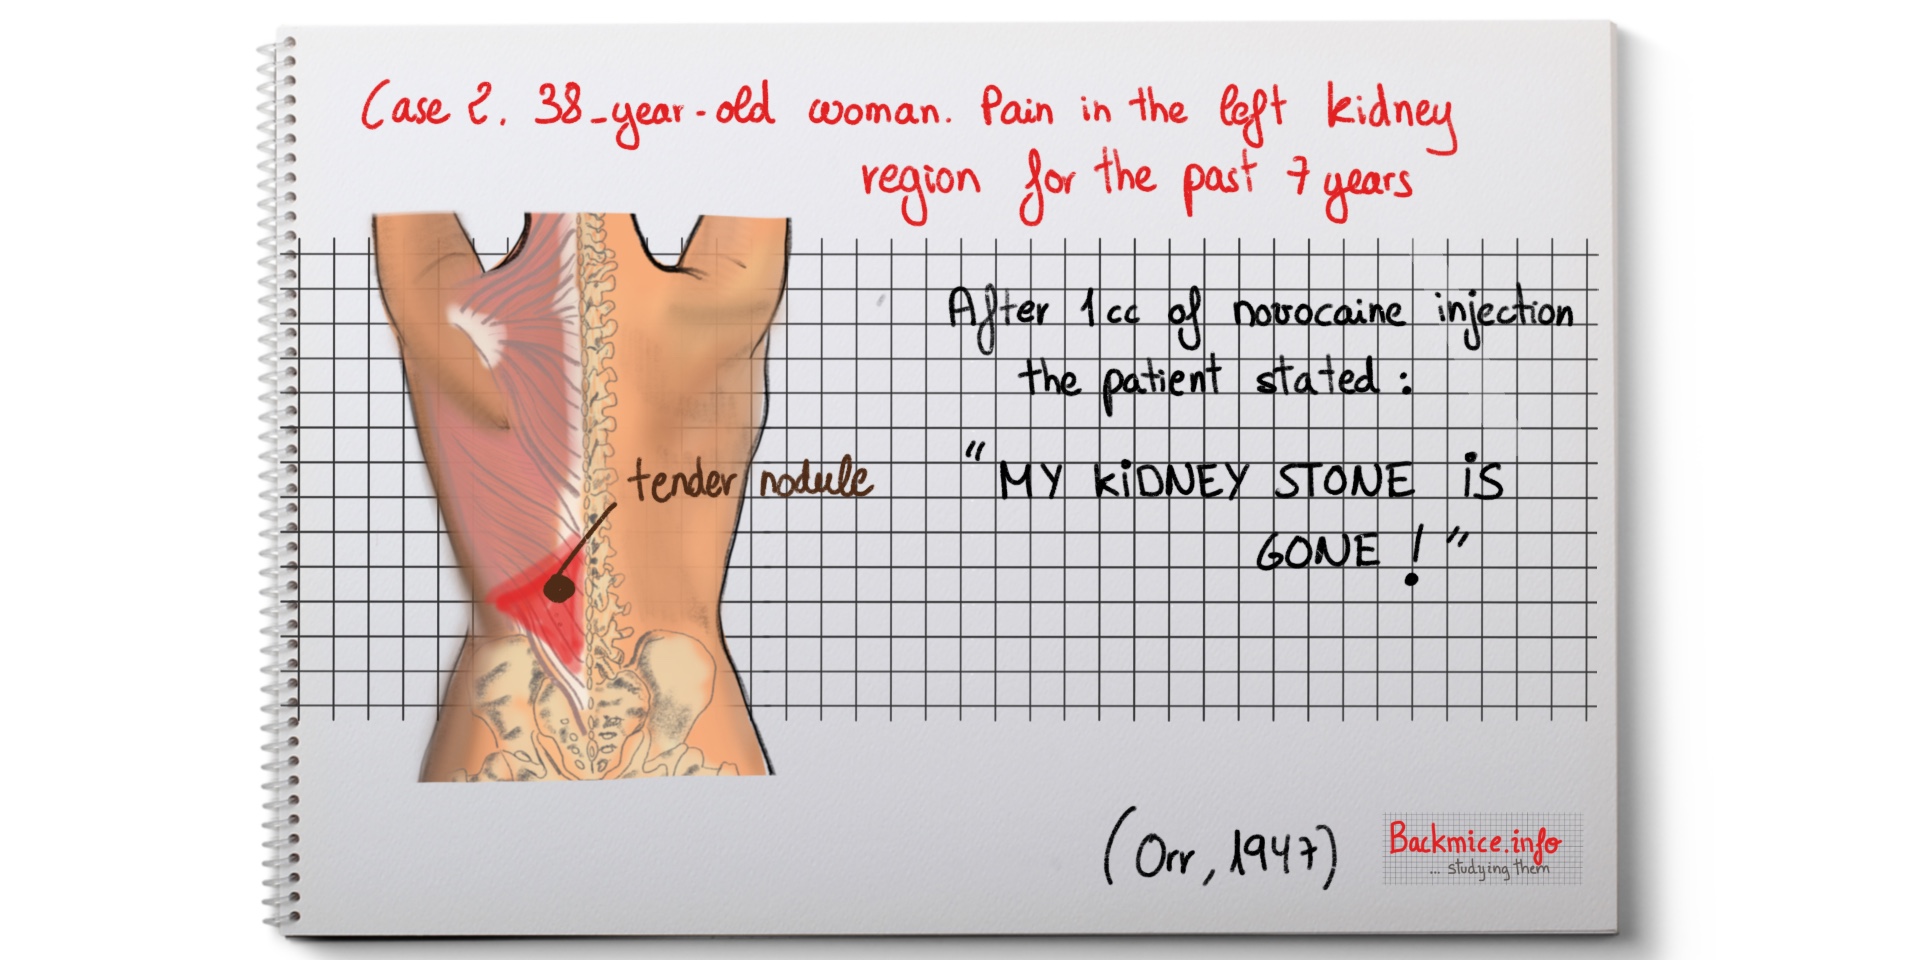 After 1cc of novocaine injection the patient stated: "my kidney stone is gone"